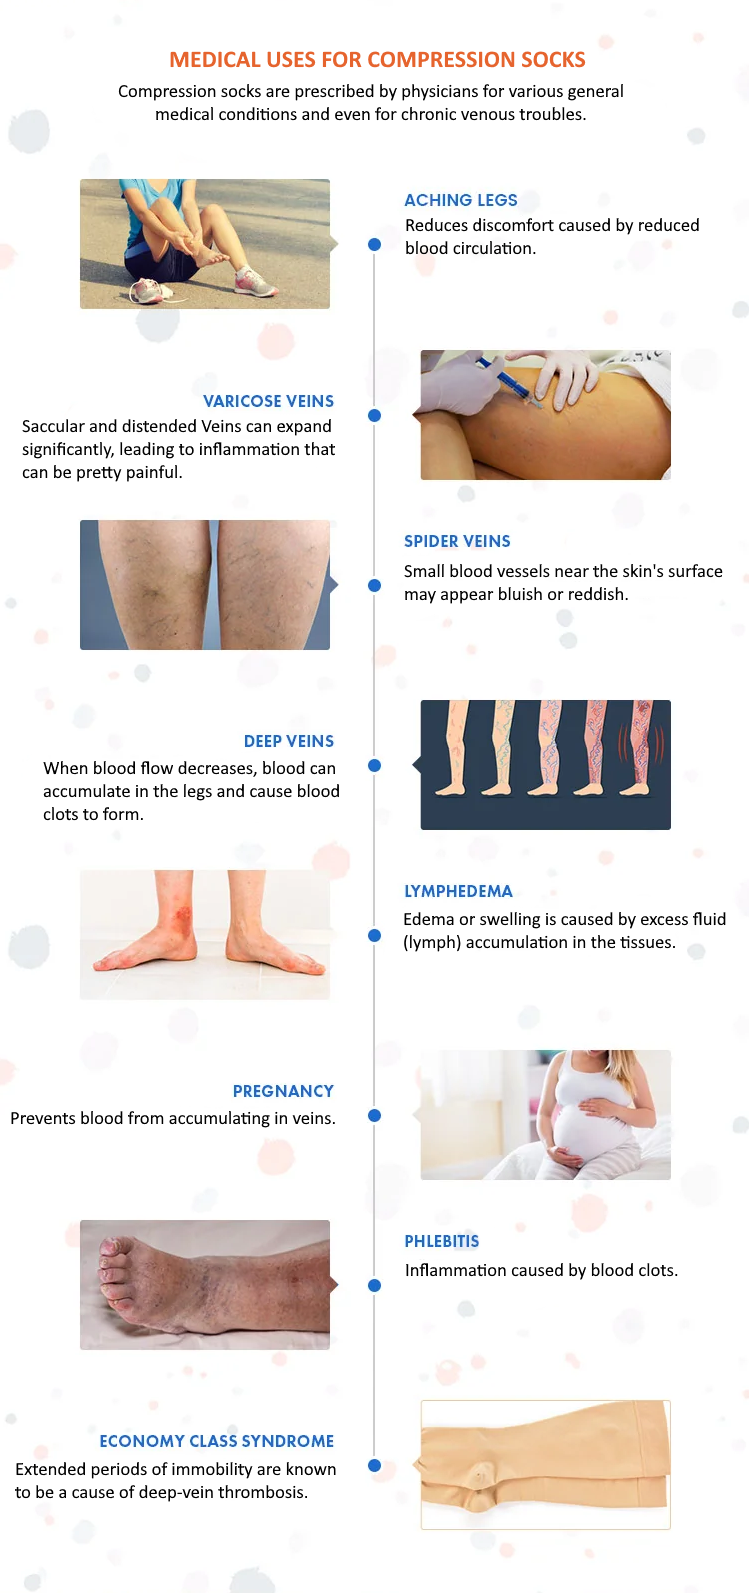 medical conditions compression socks help with